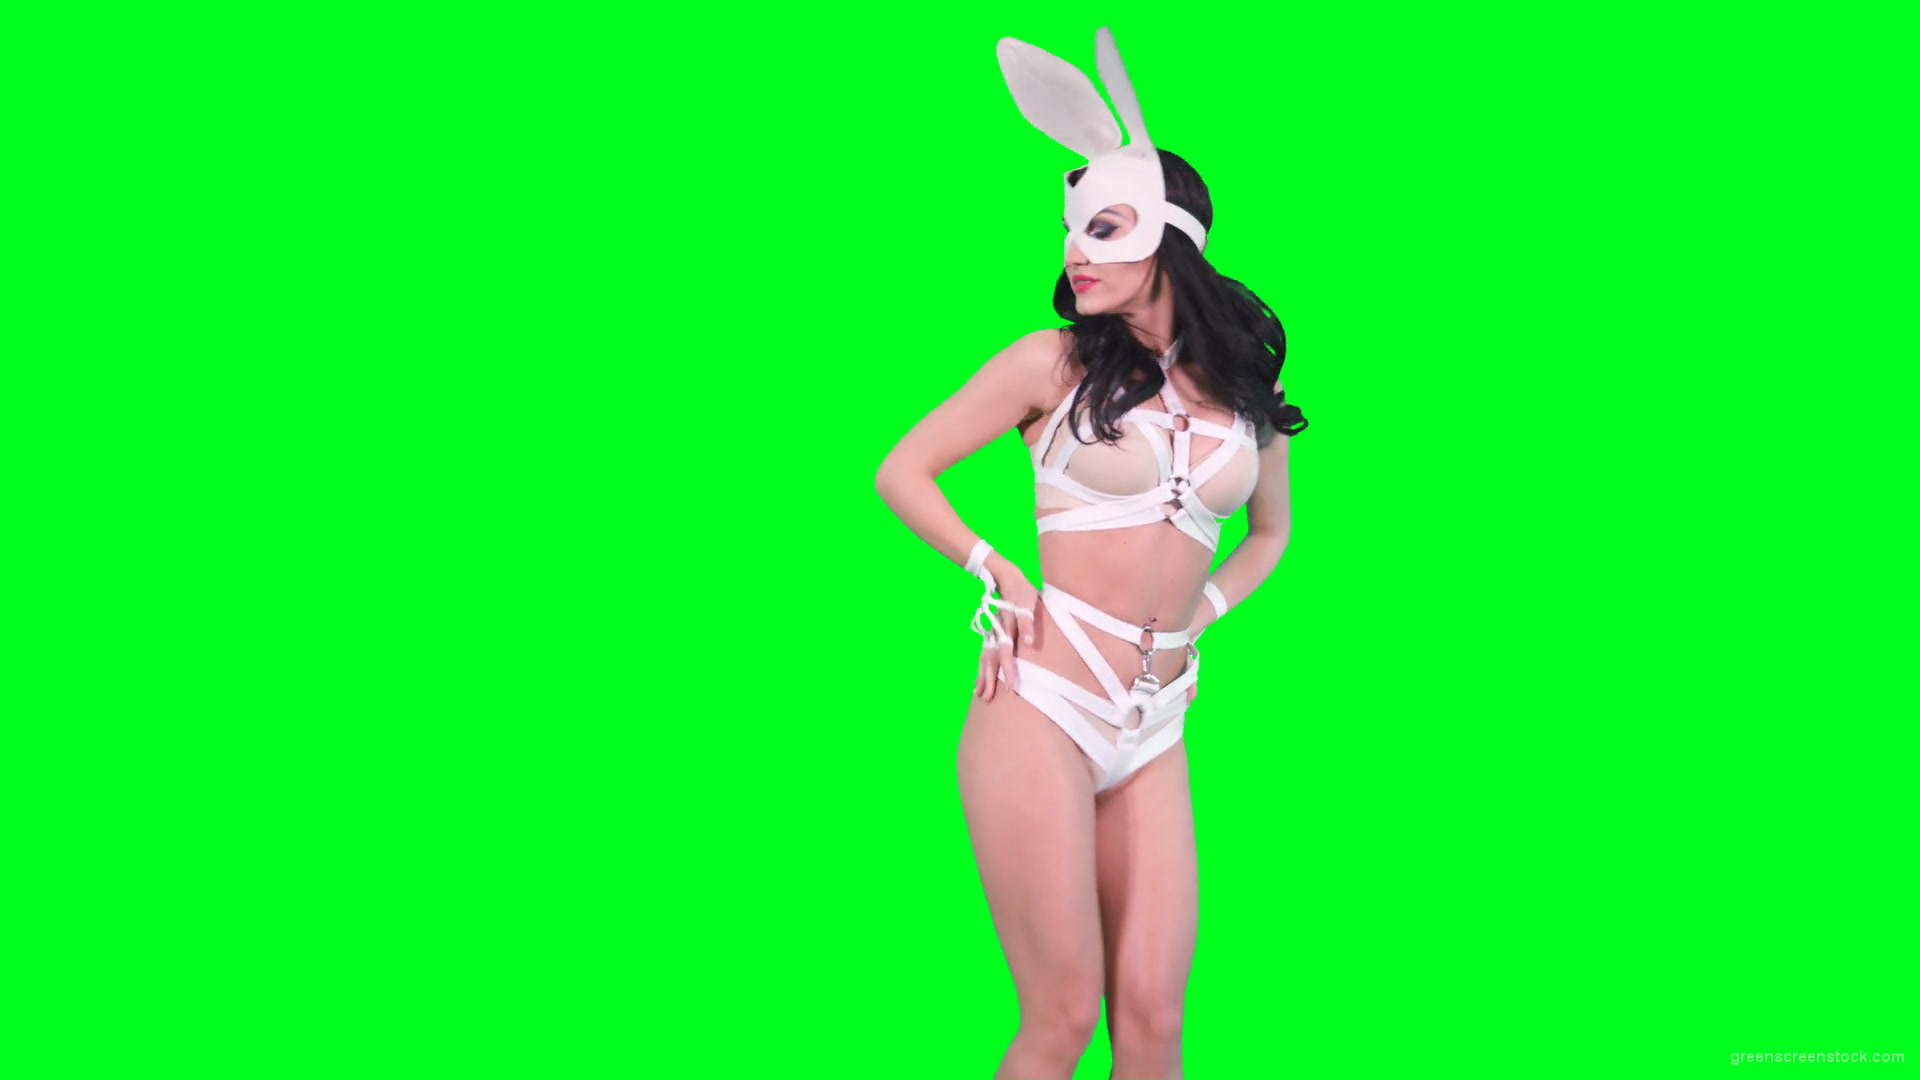 Sexy-bunny-girl-in-rabbit-costume-on-green-screen-4K-Video-Footage-1920_009 Green Screen Stock